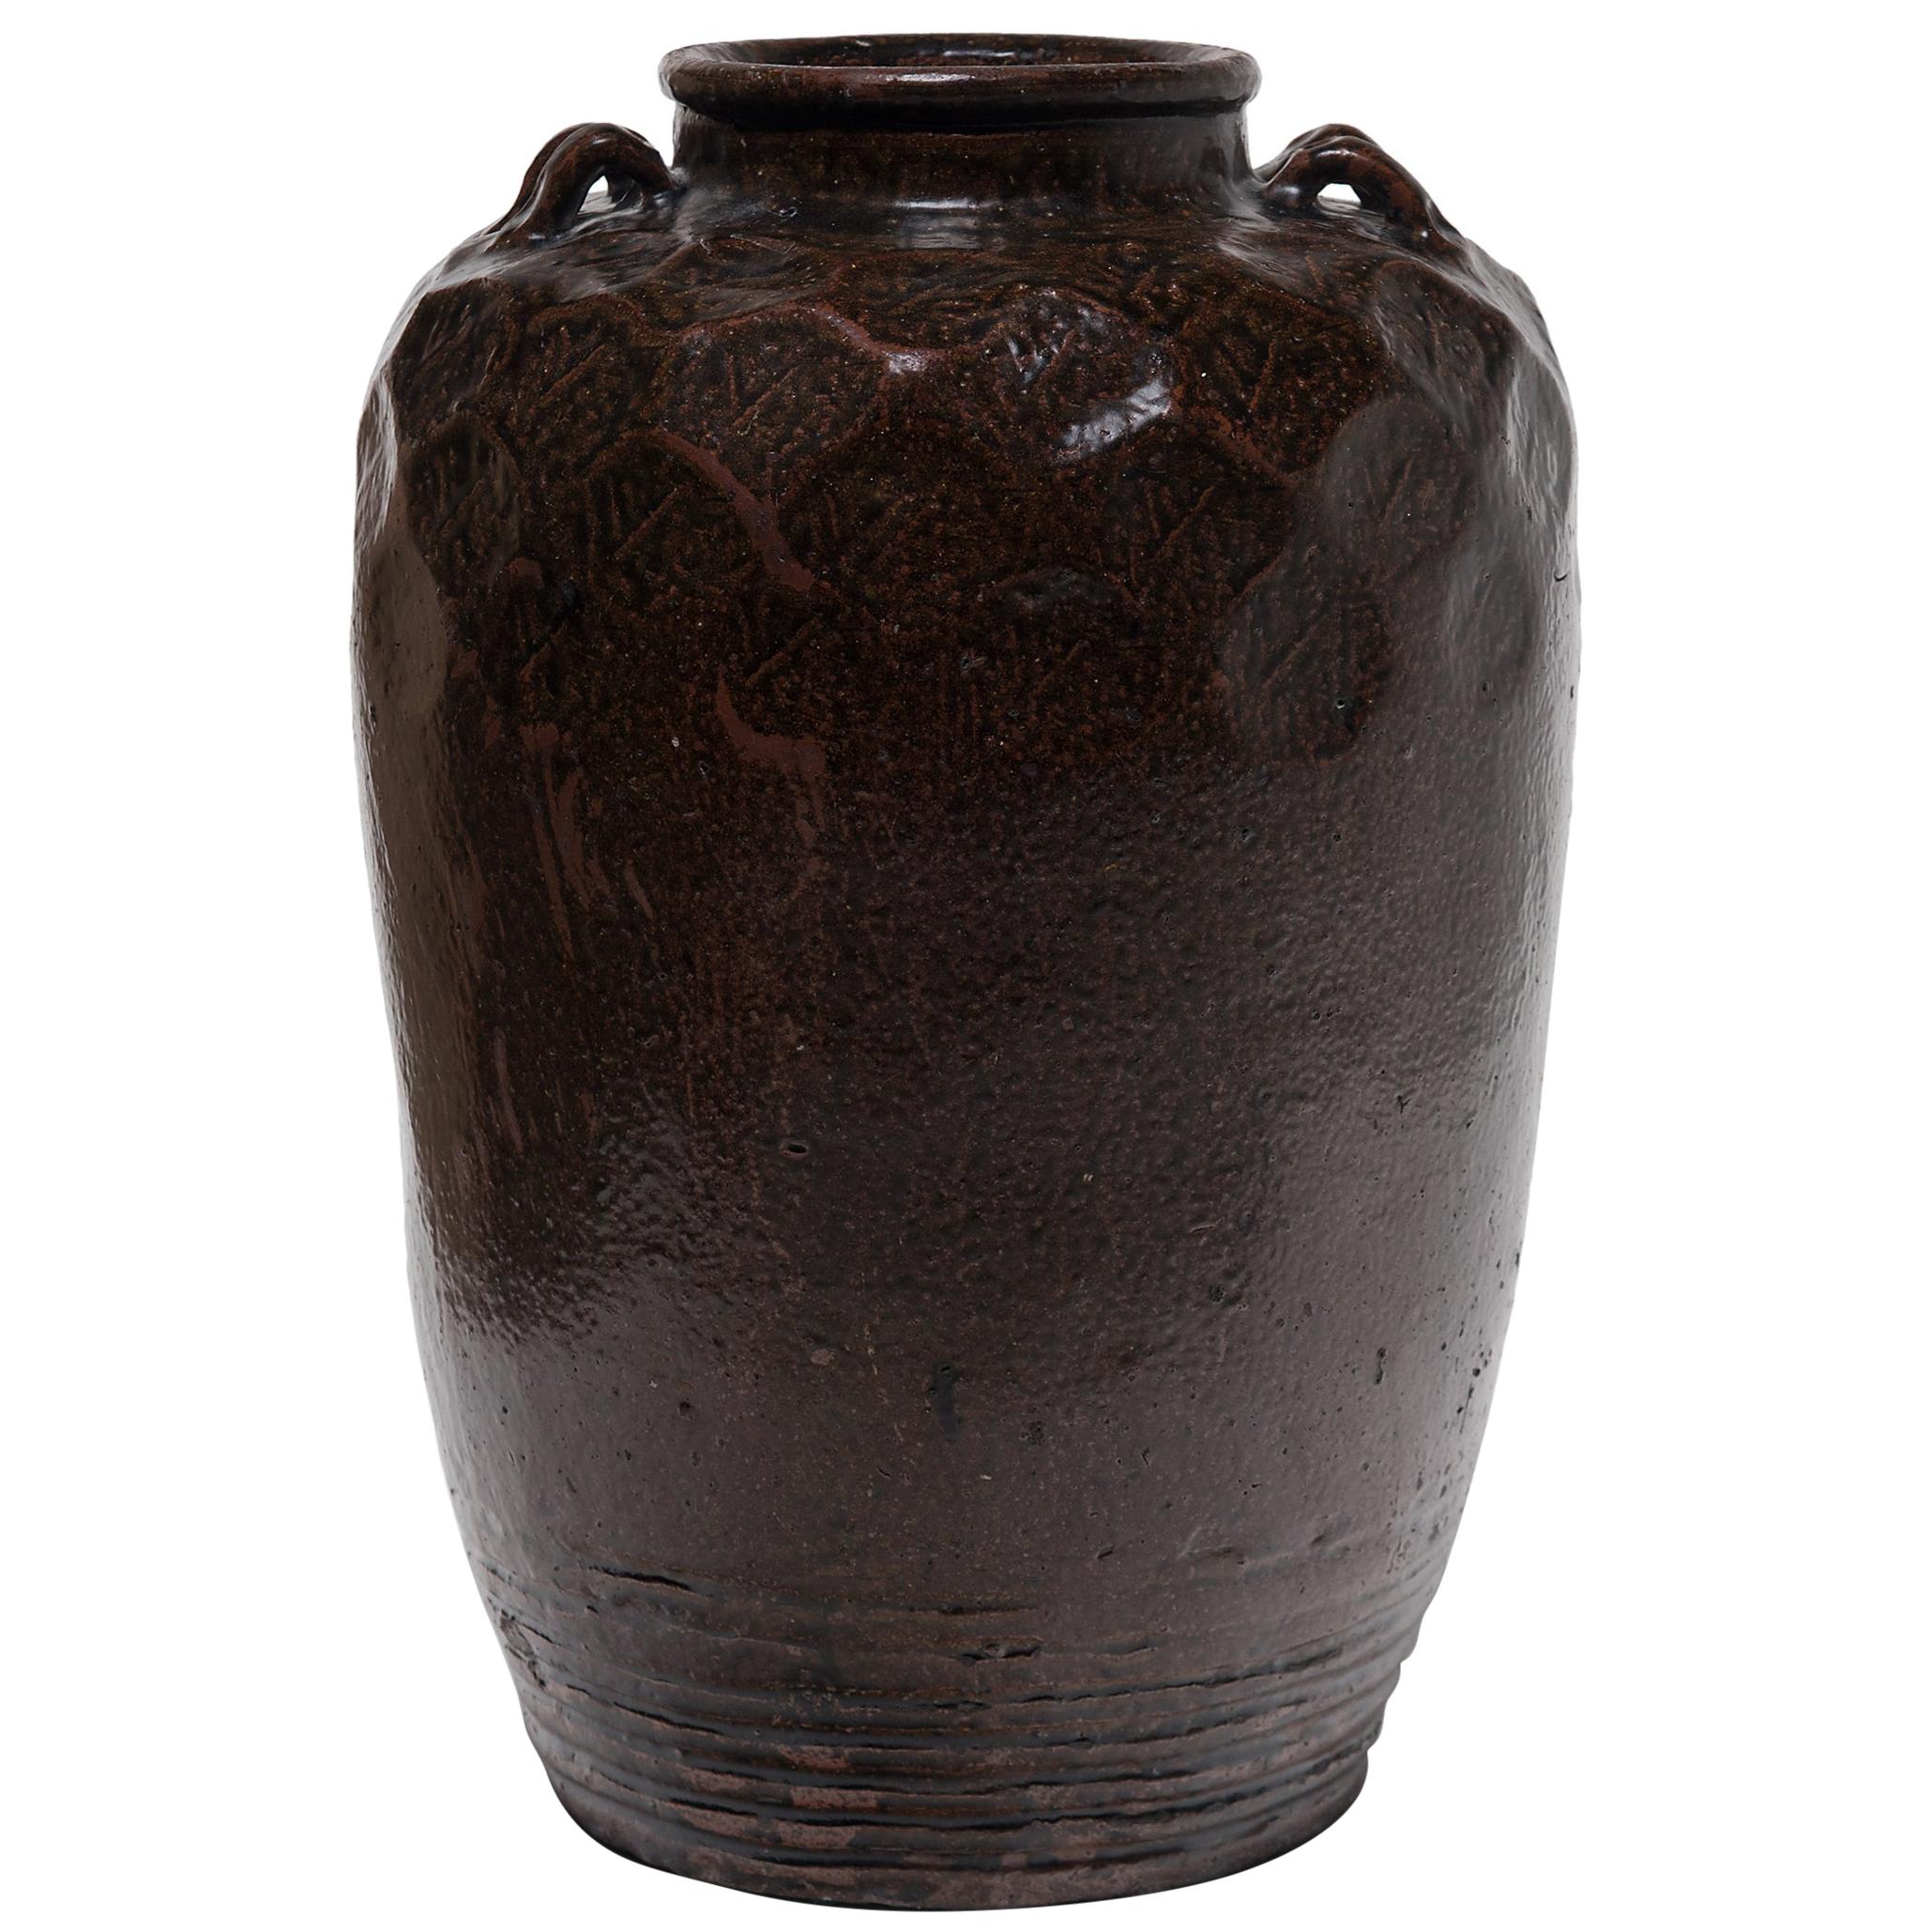 Chinese Faceted Wine Jar, c. 1900